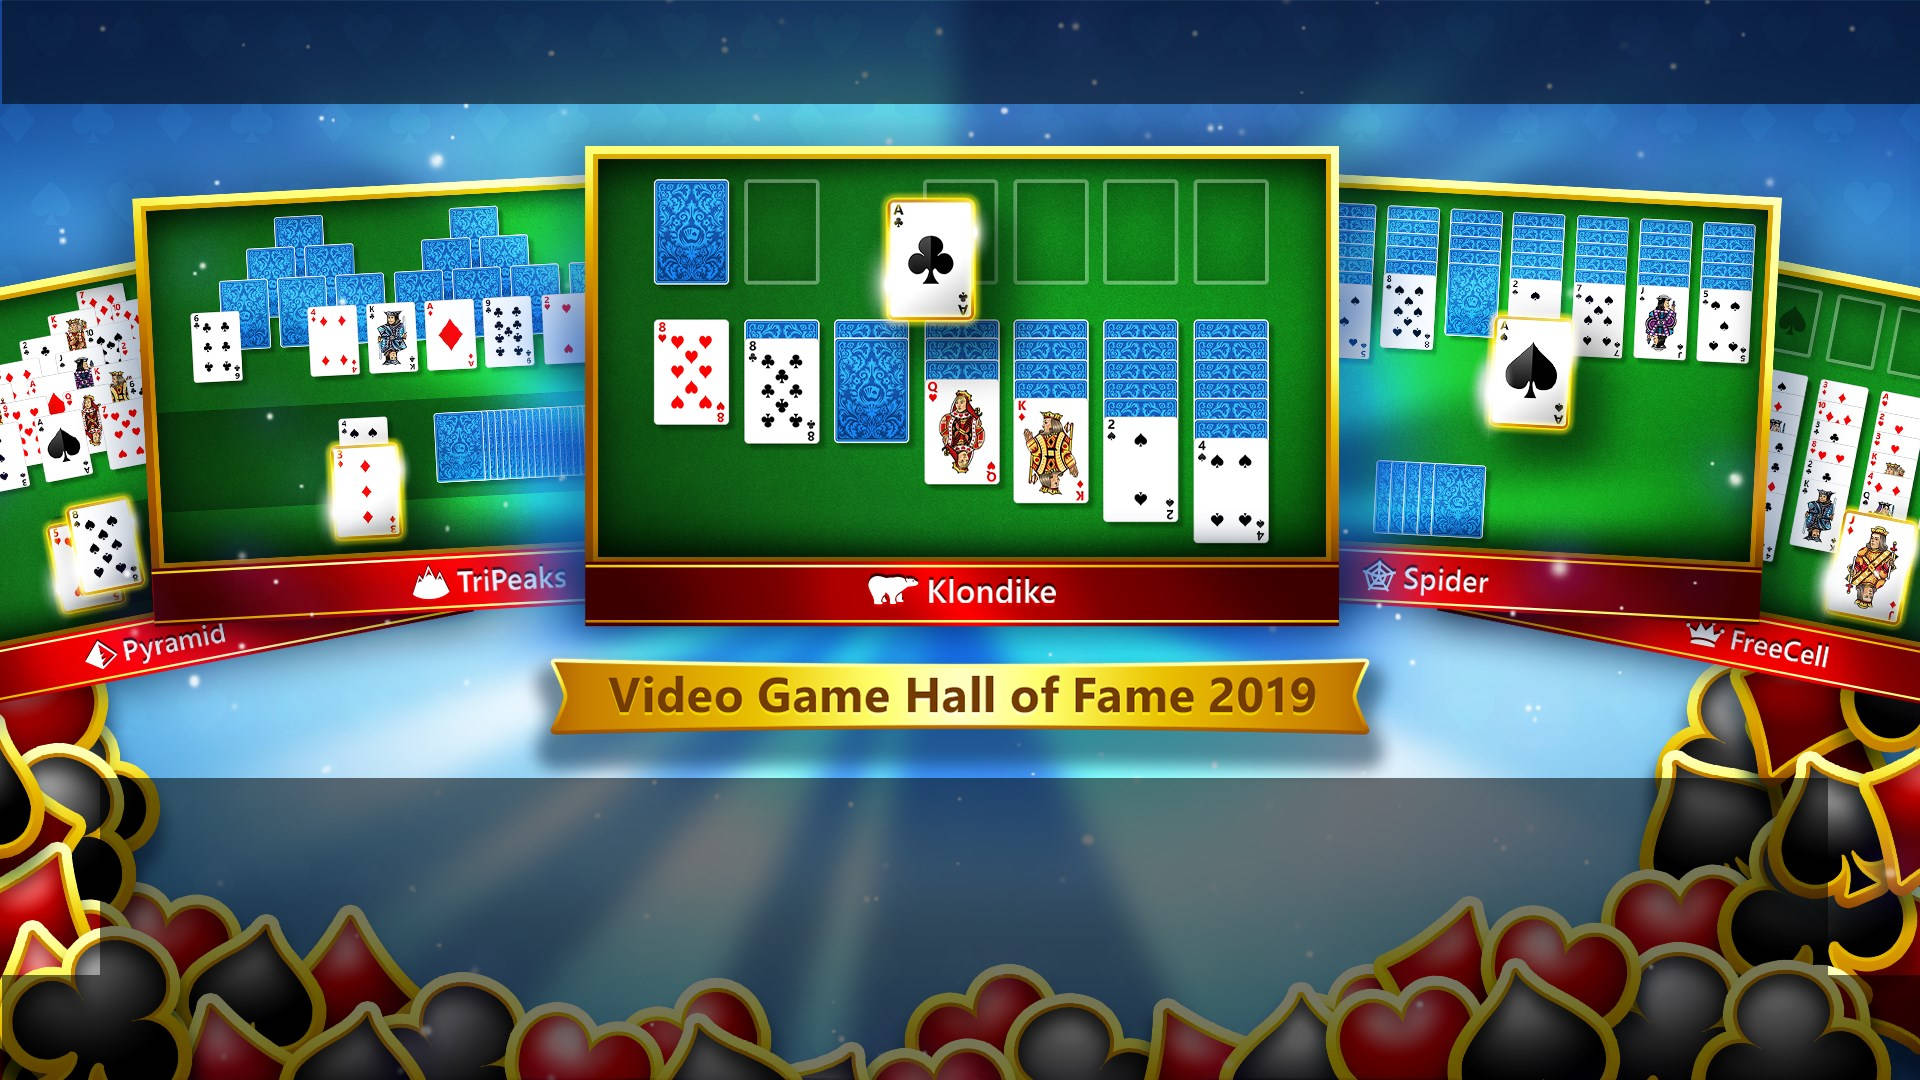 Microsoftsolitaire Spiel Hall Of Fame 2019 Wallpaper